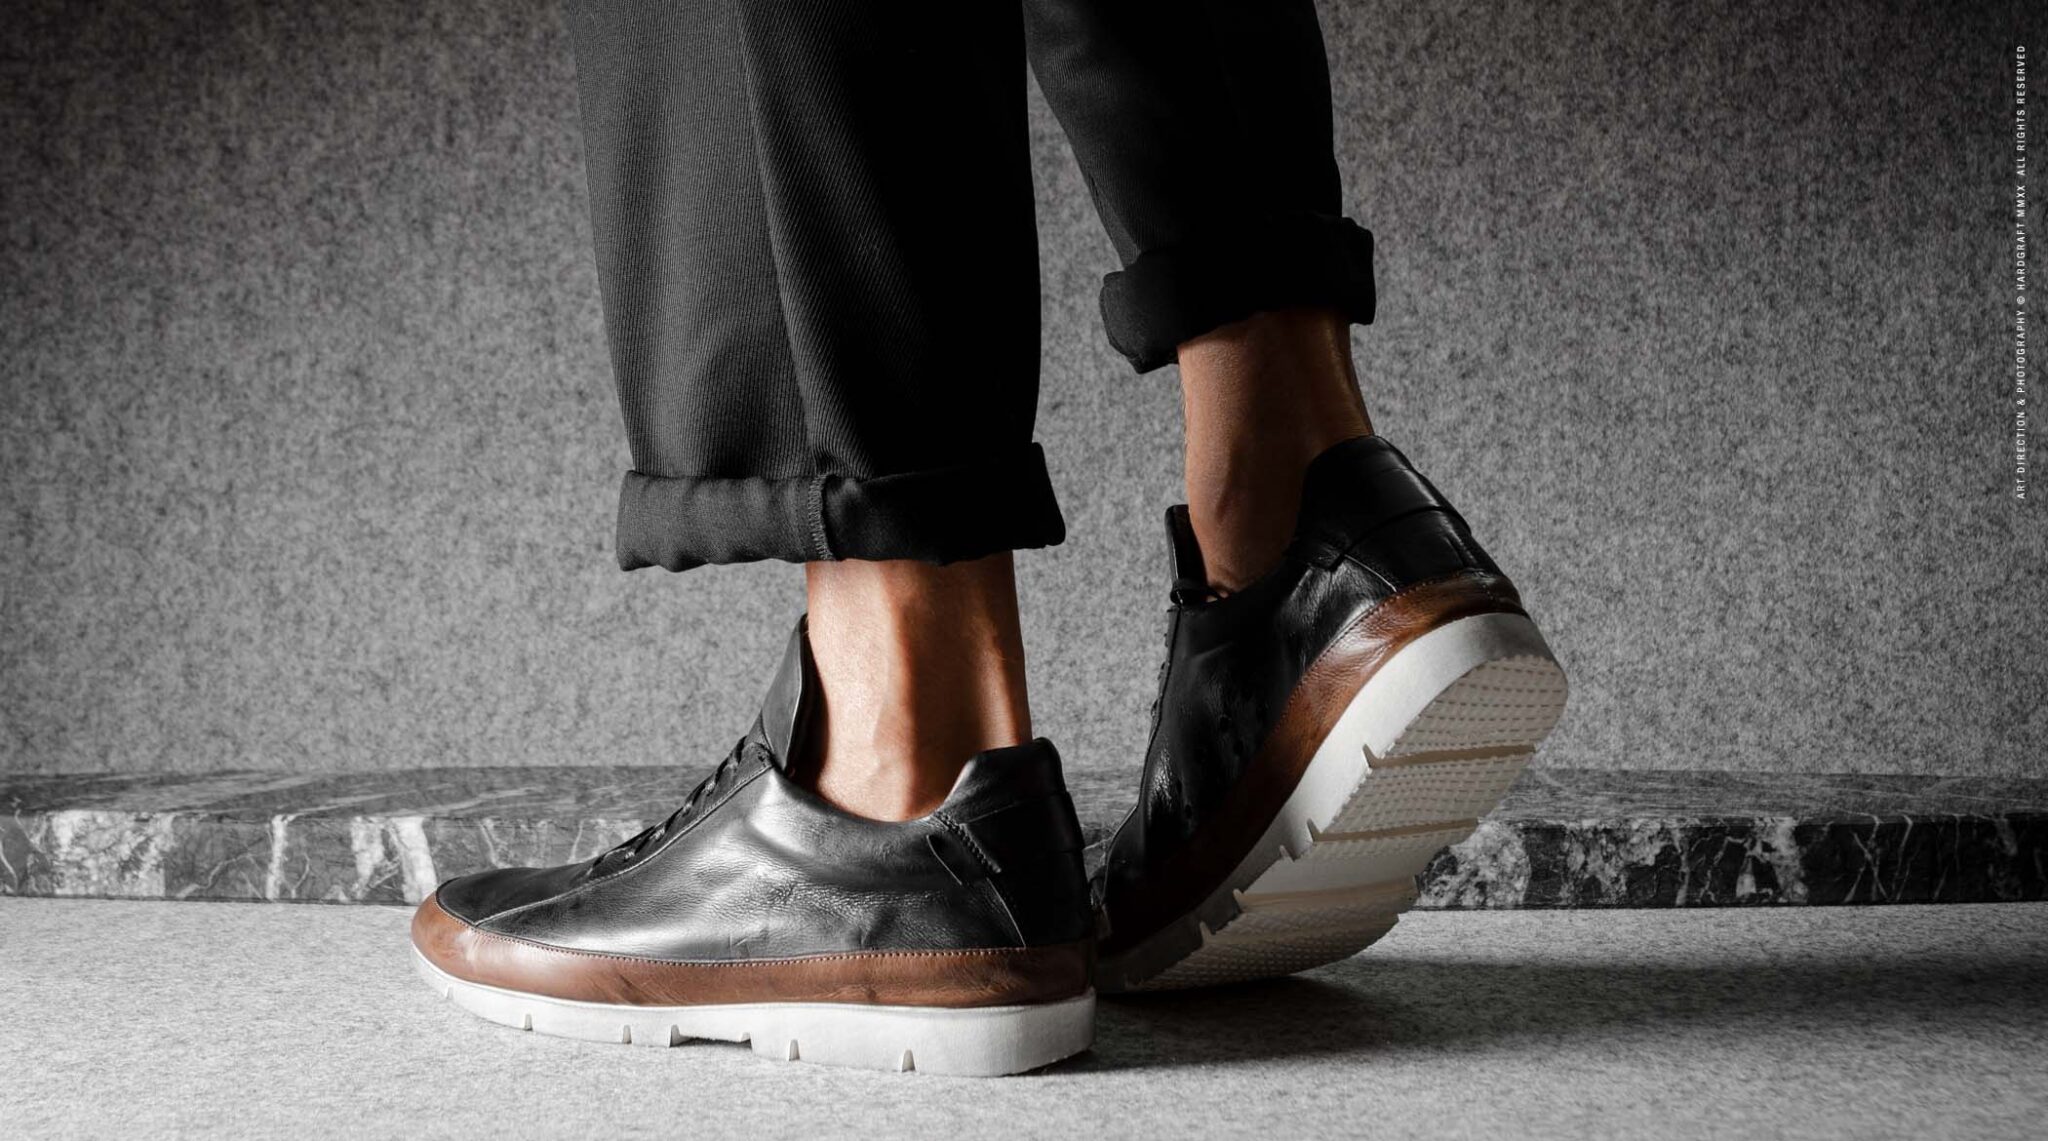 Hard Graft S3 Sneakers in Coal | The Coolector